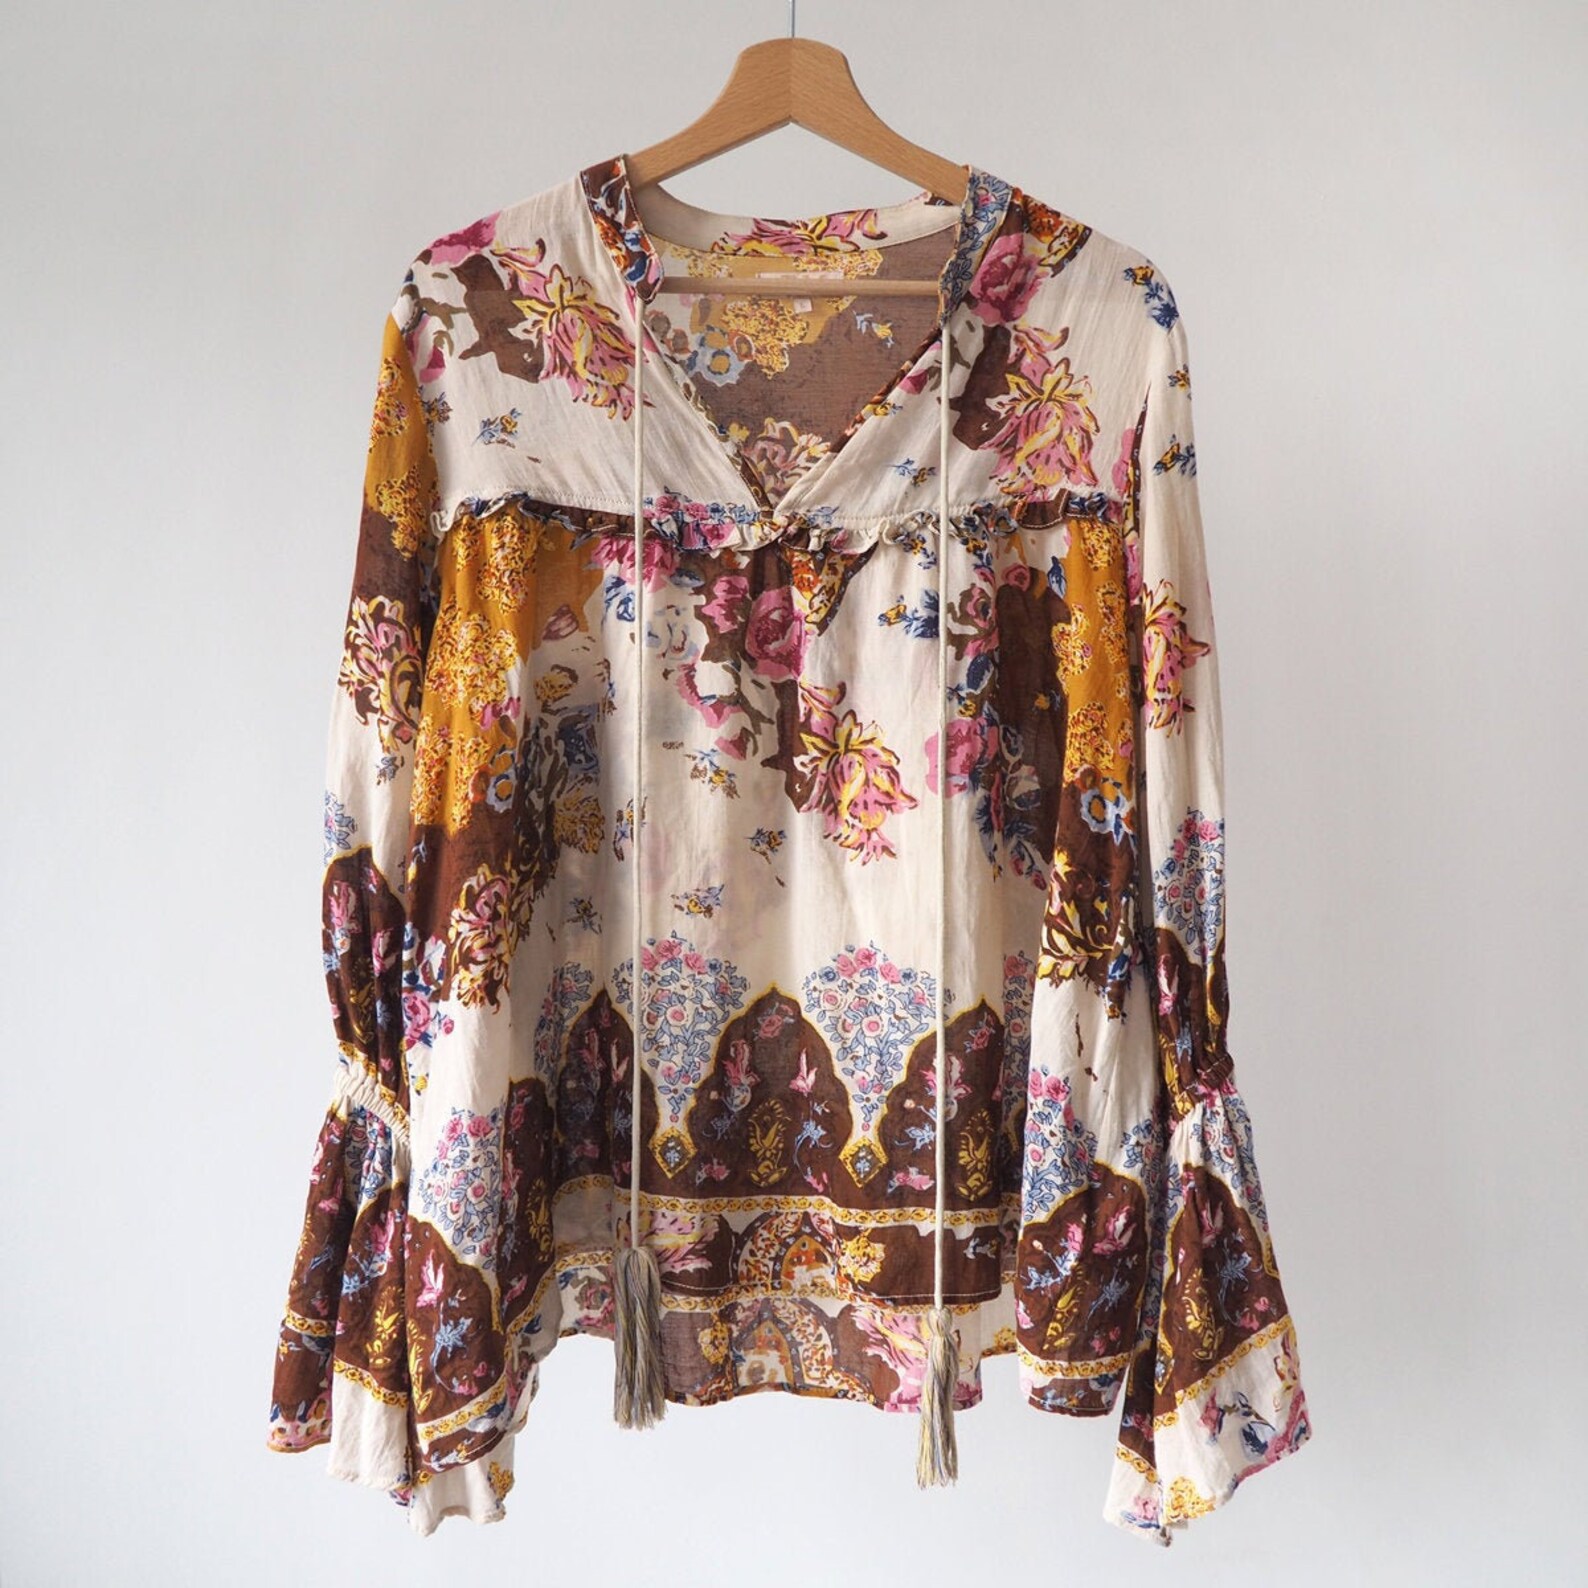 By Timo Norway Floral Print Blouse Shirt Retro Hippie Boho - Etsy